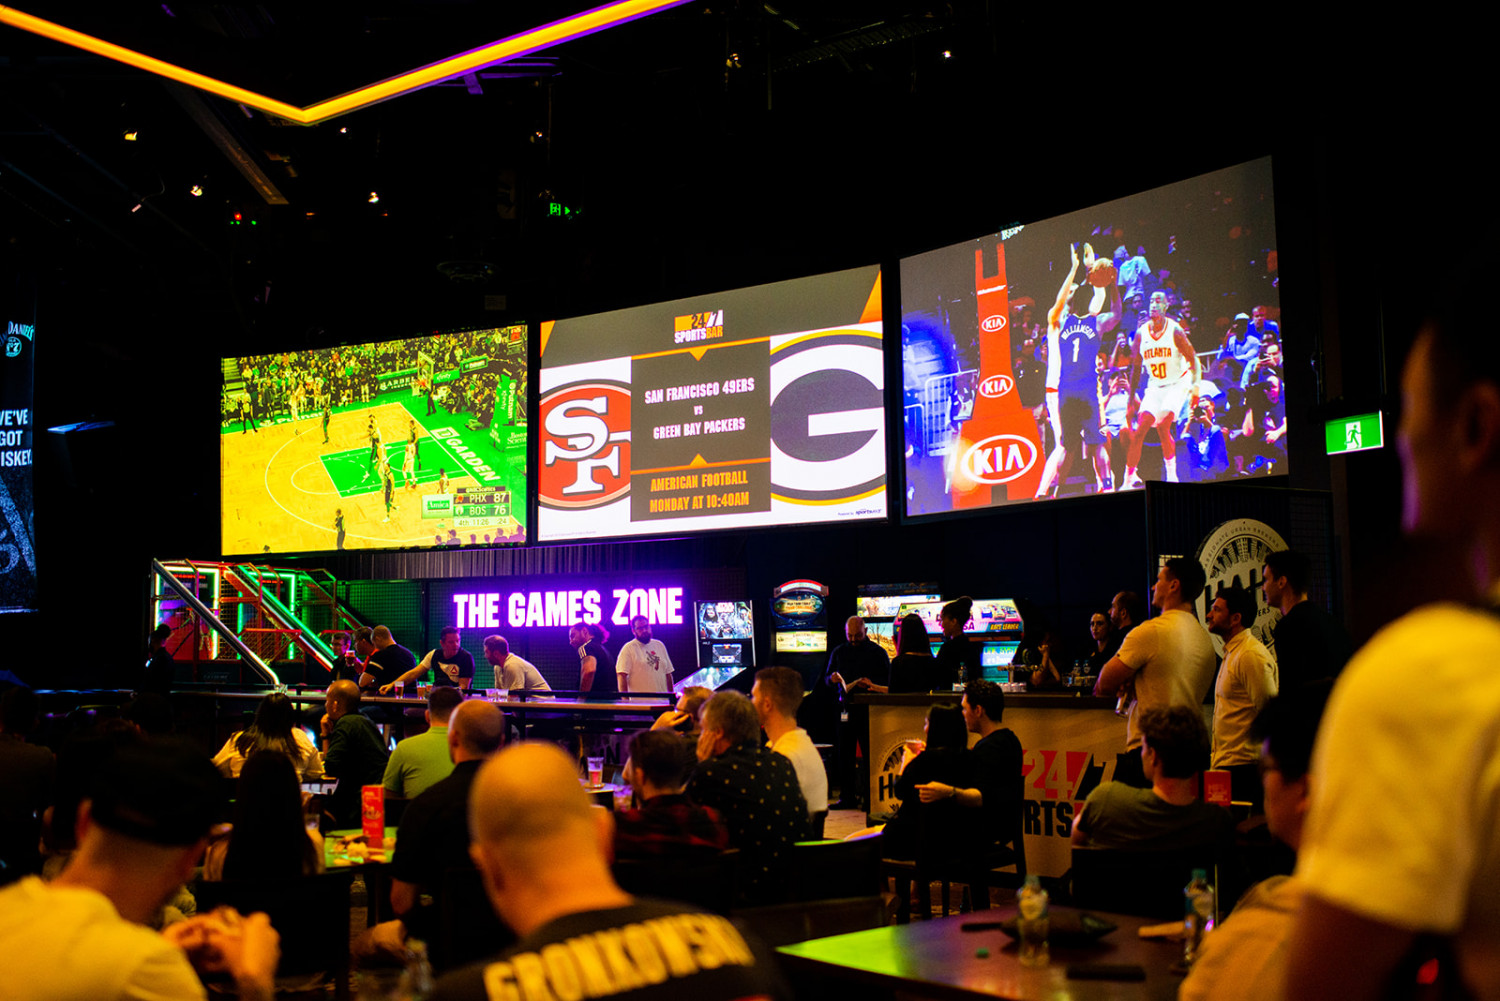 Sportsyear’s digital signage promotes live action as well as key upcoming events in a clear and accurate manner.